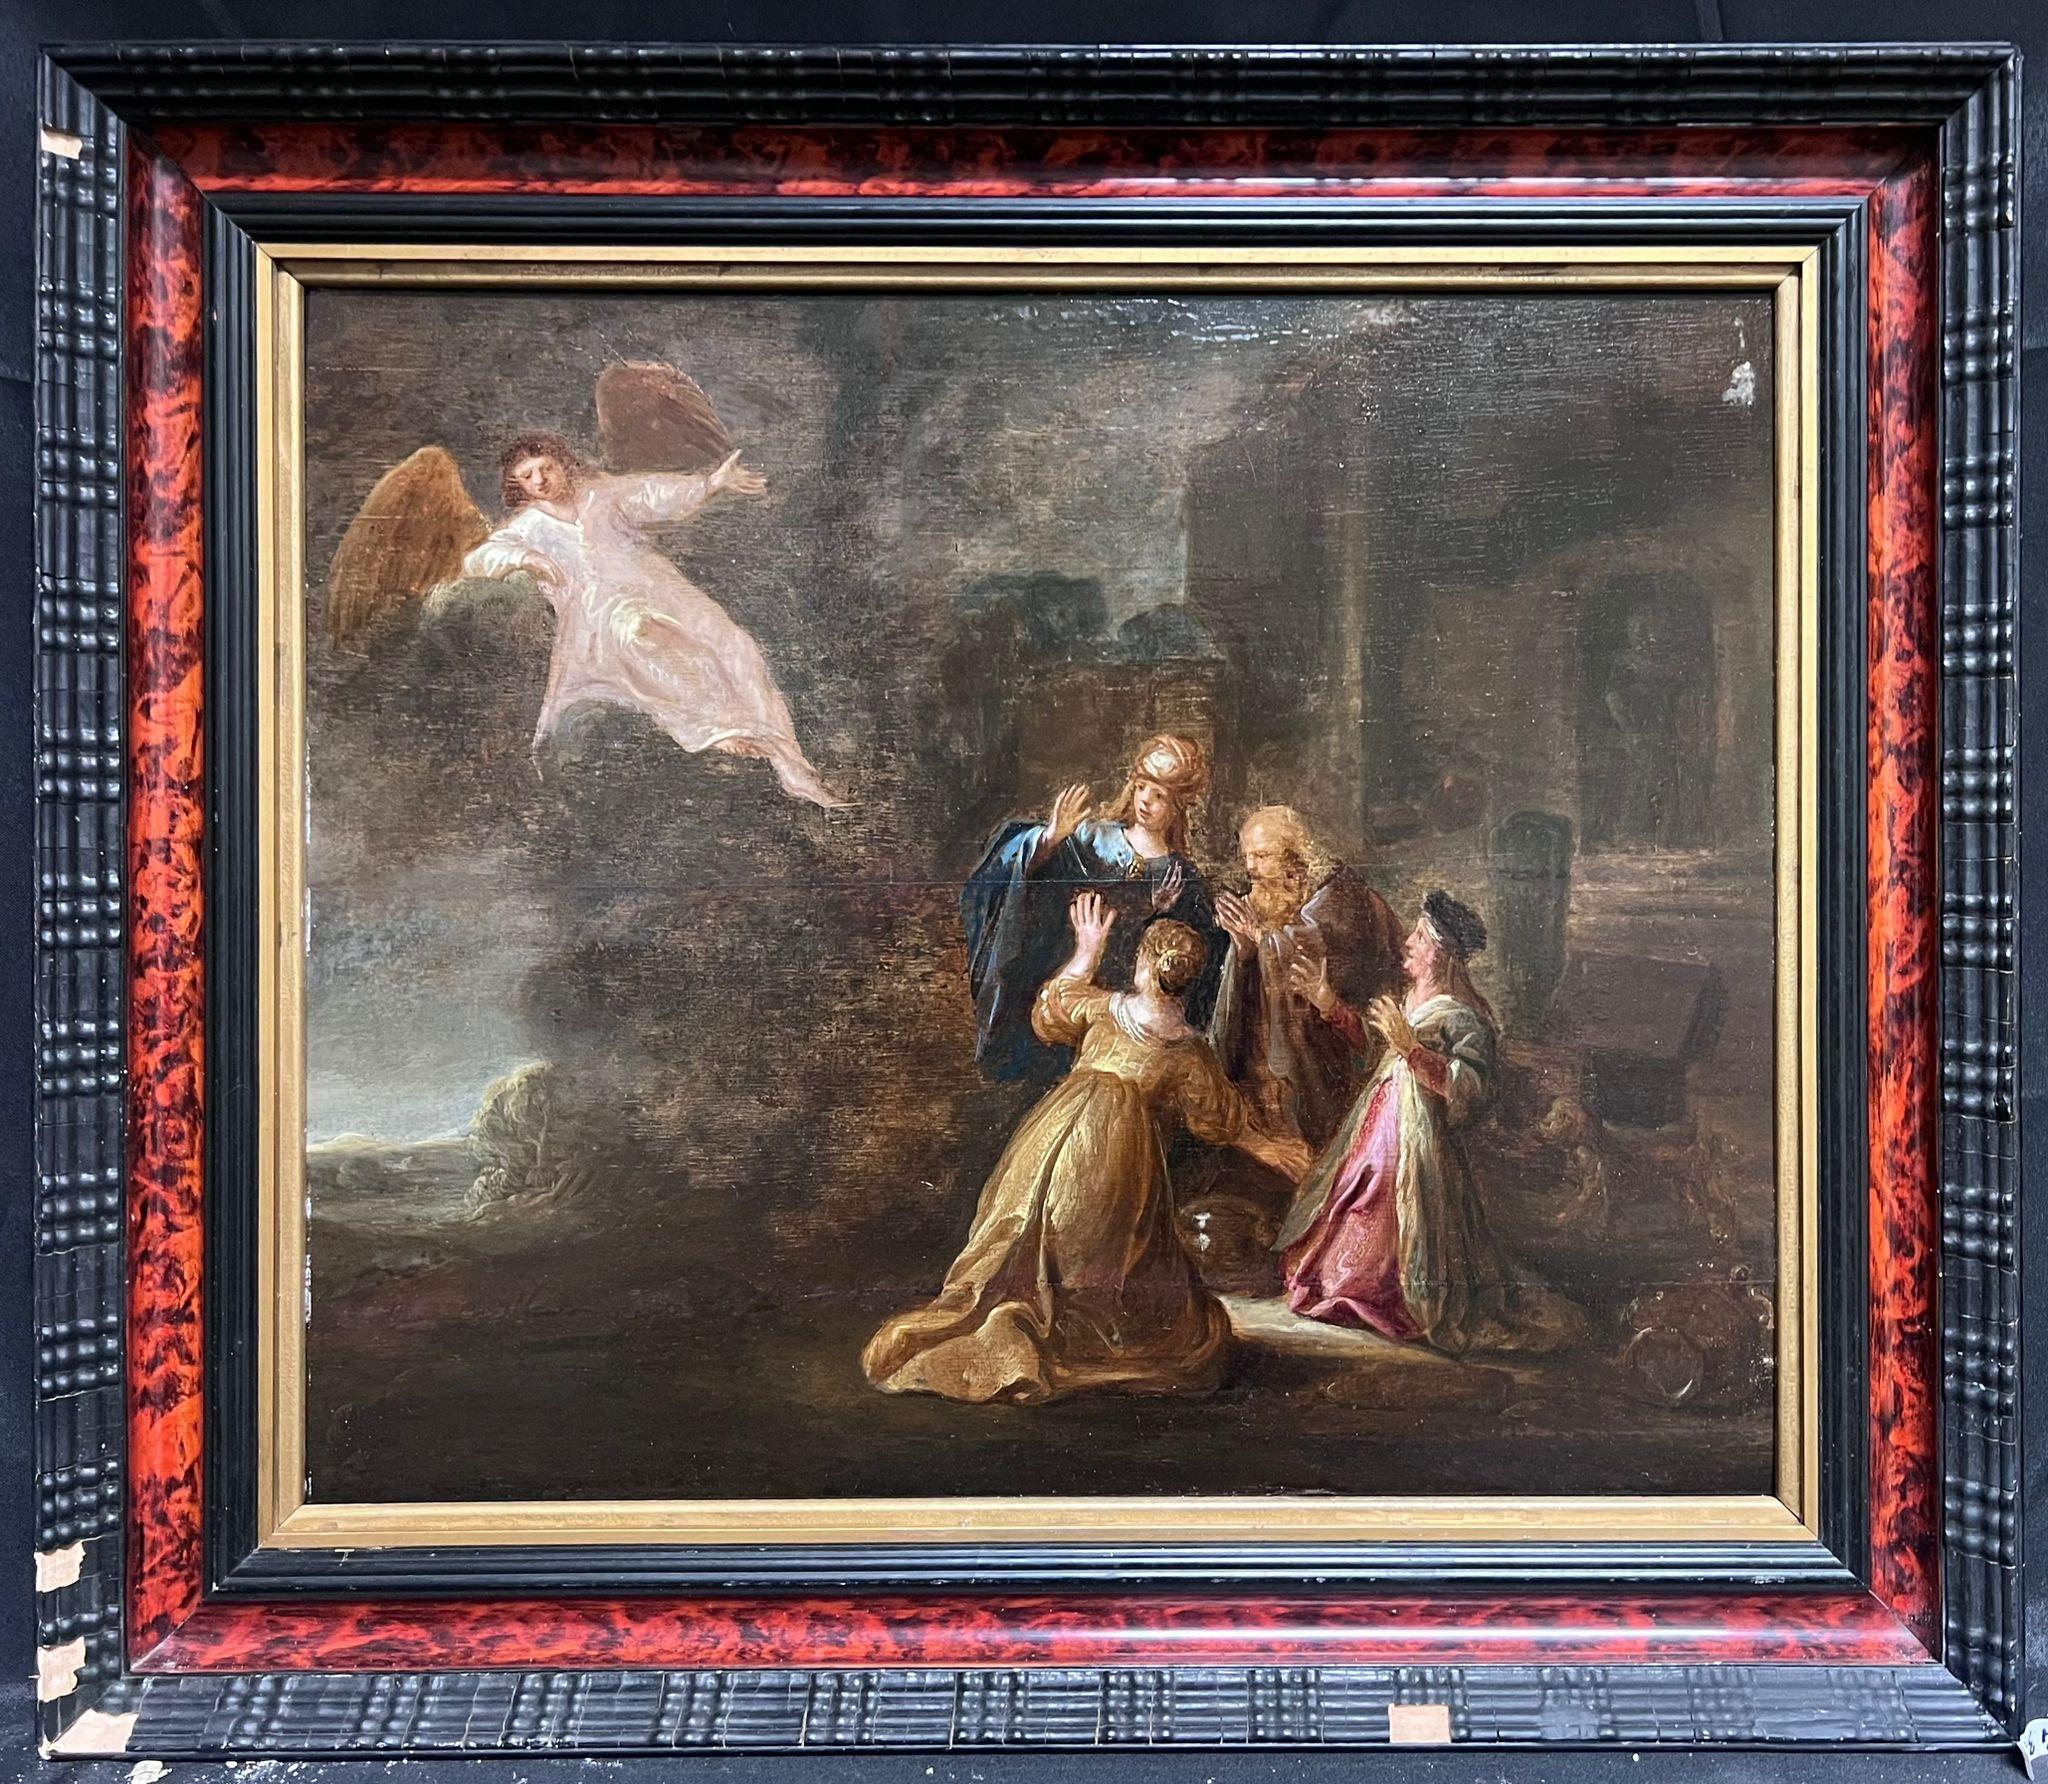 Fine 17th Century Dutch Old Master Oil on Panel Angelic Visitation to Figures - Painting by Rembrandt van Rijn